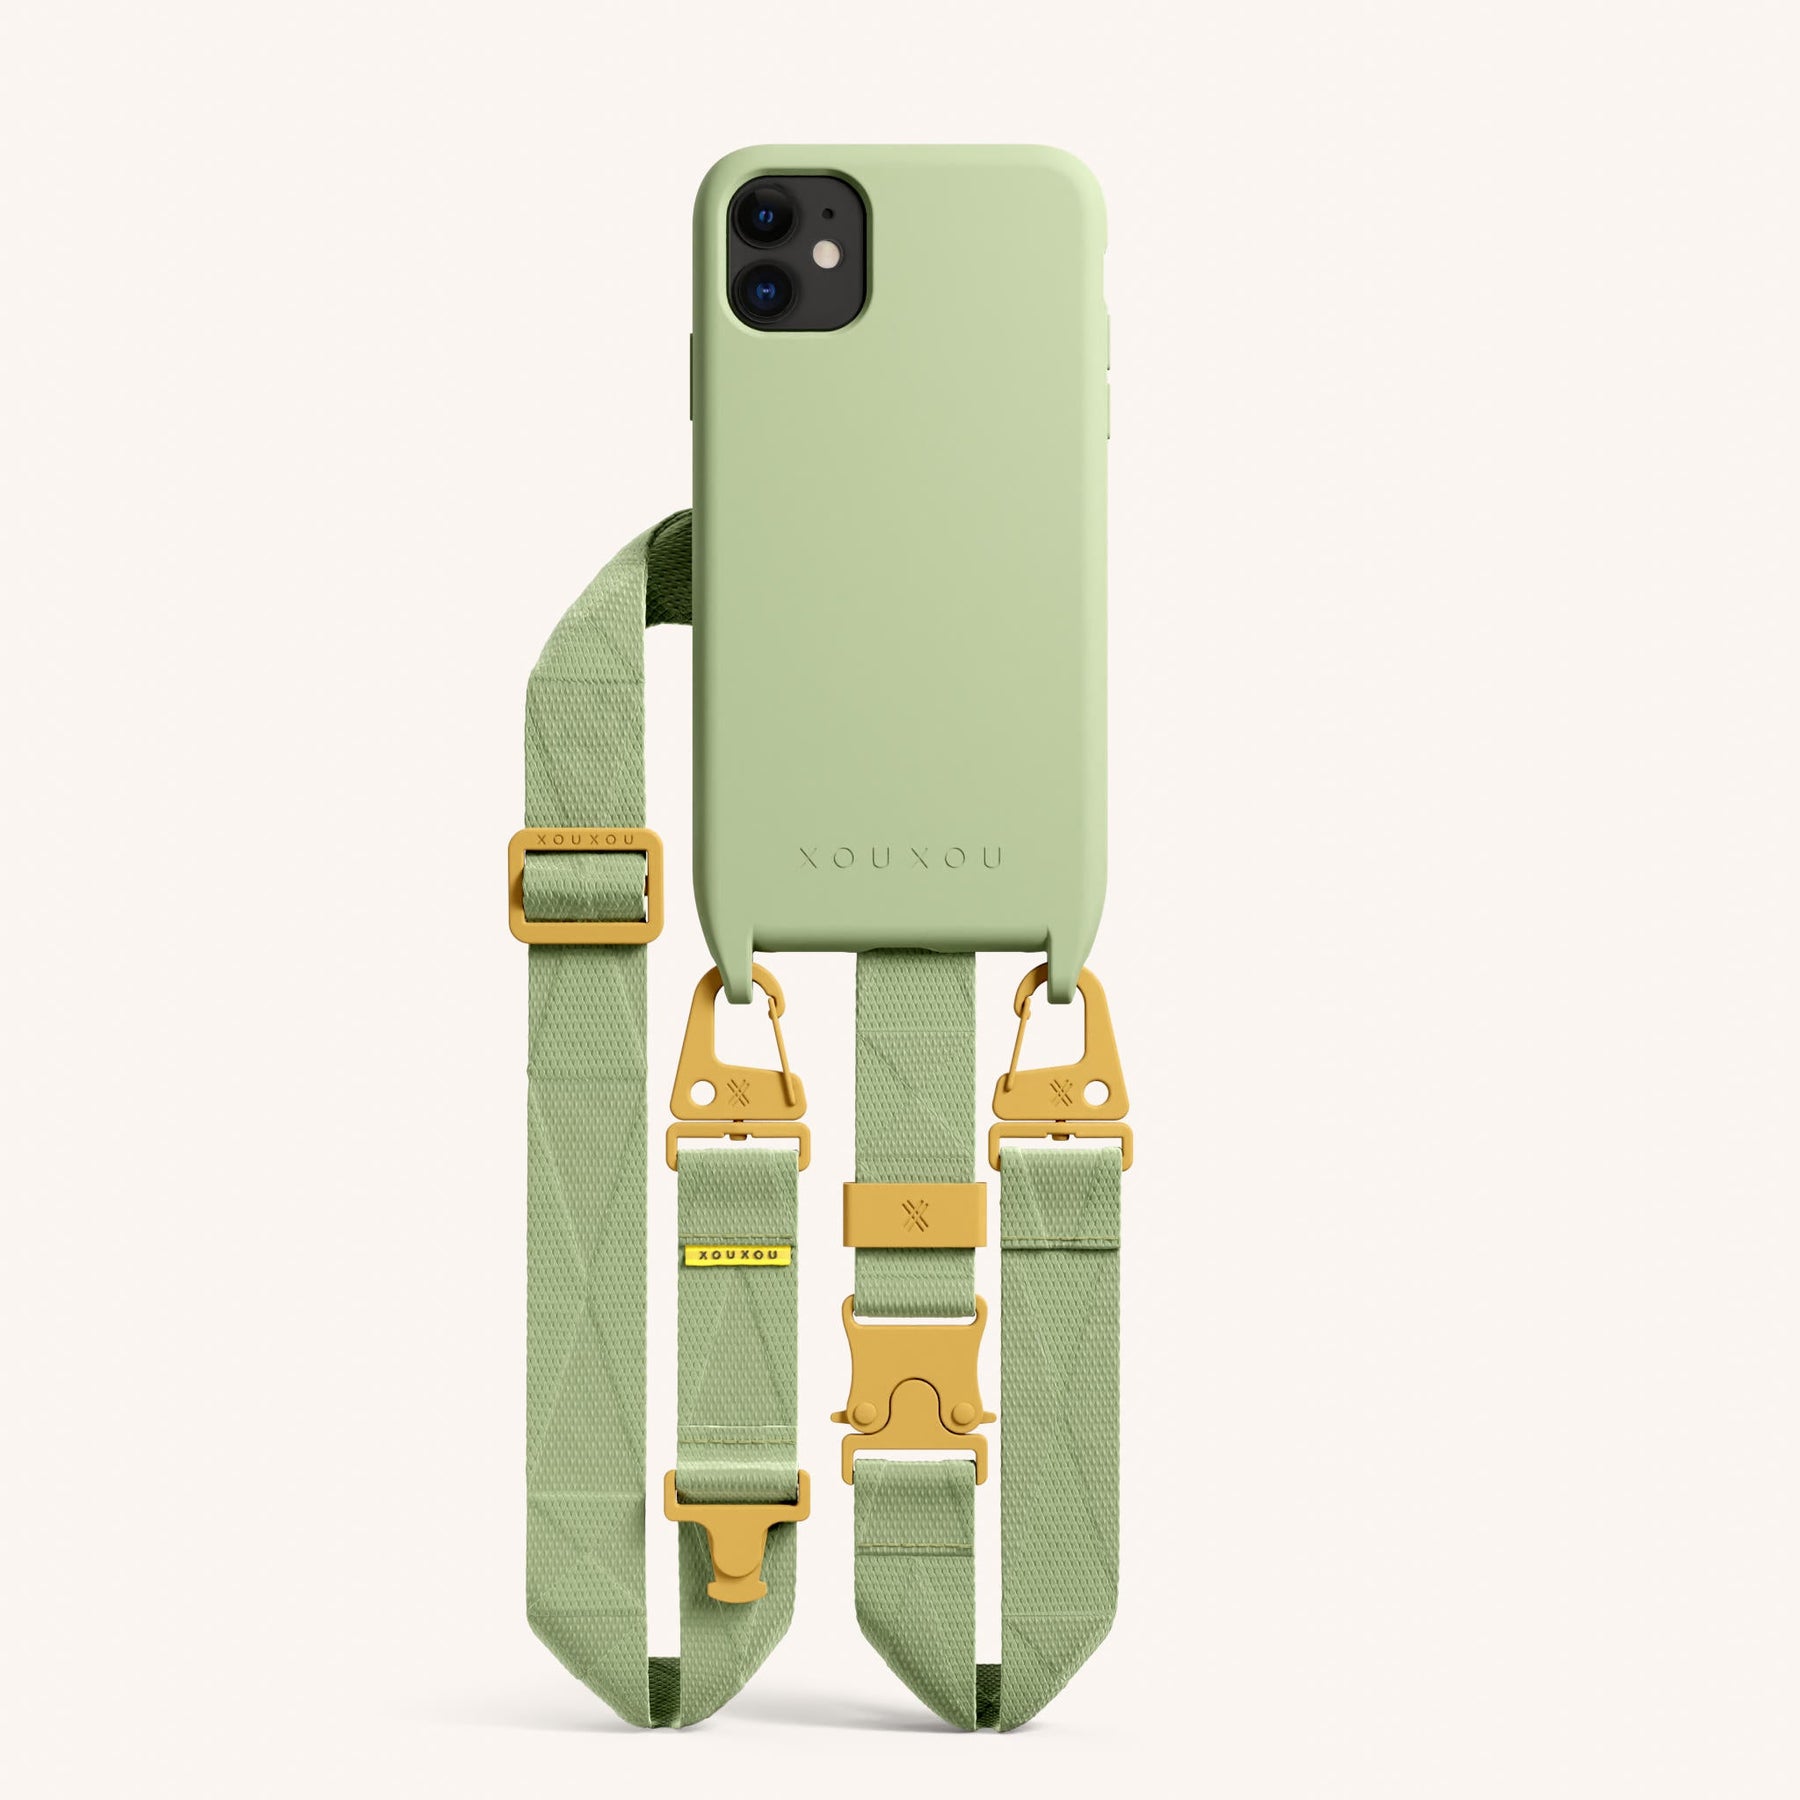 Phone Necklace with Lanyard in Light Olive